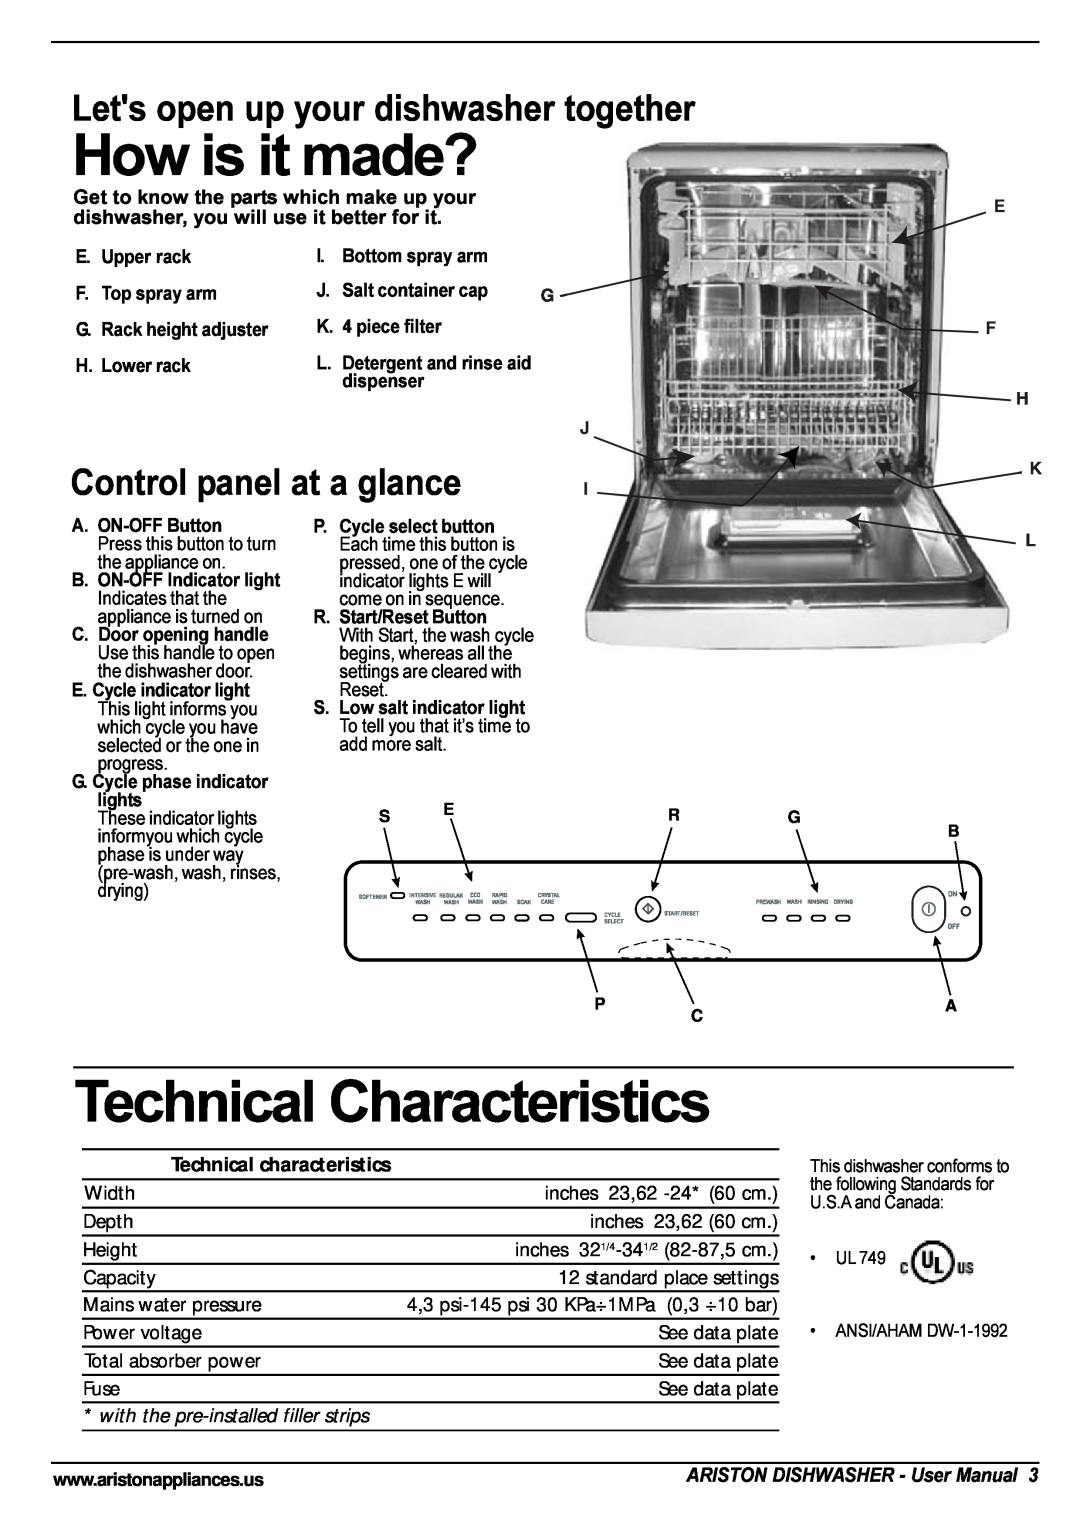 Ariston LL 64 B-S-W manual How is it made?, Technical Characteristics, Lets open up your dishwasher together 